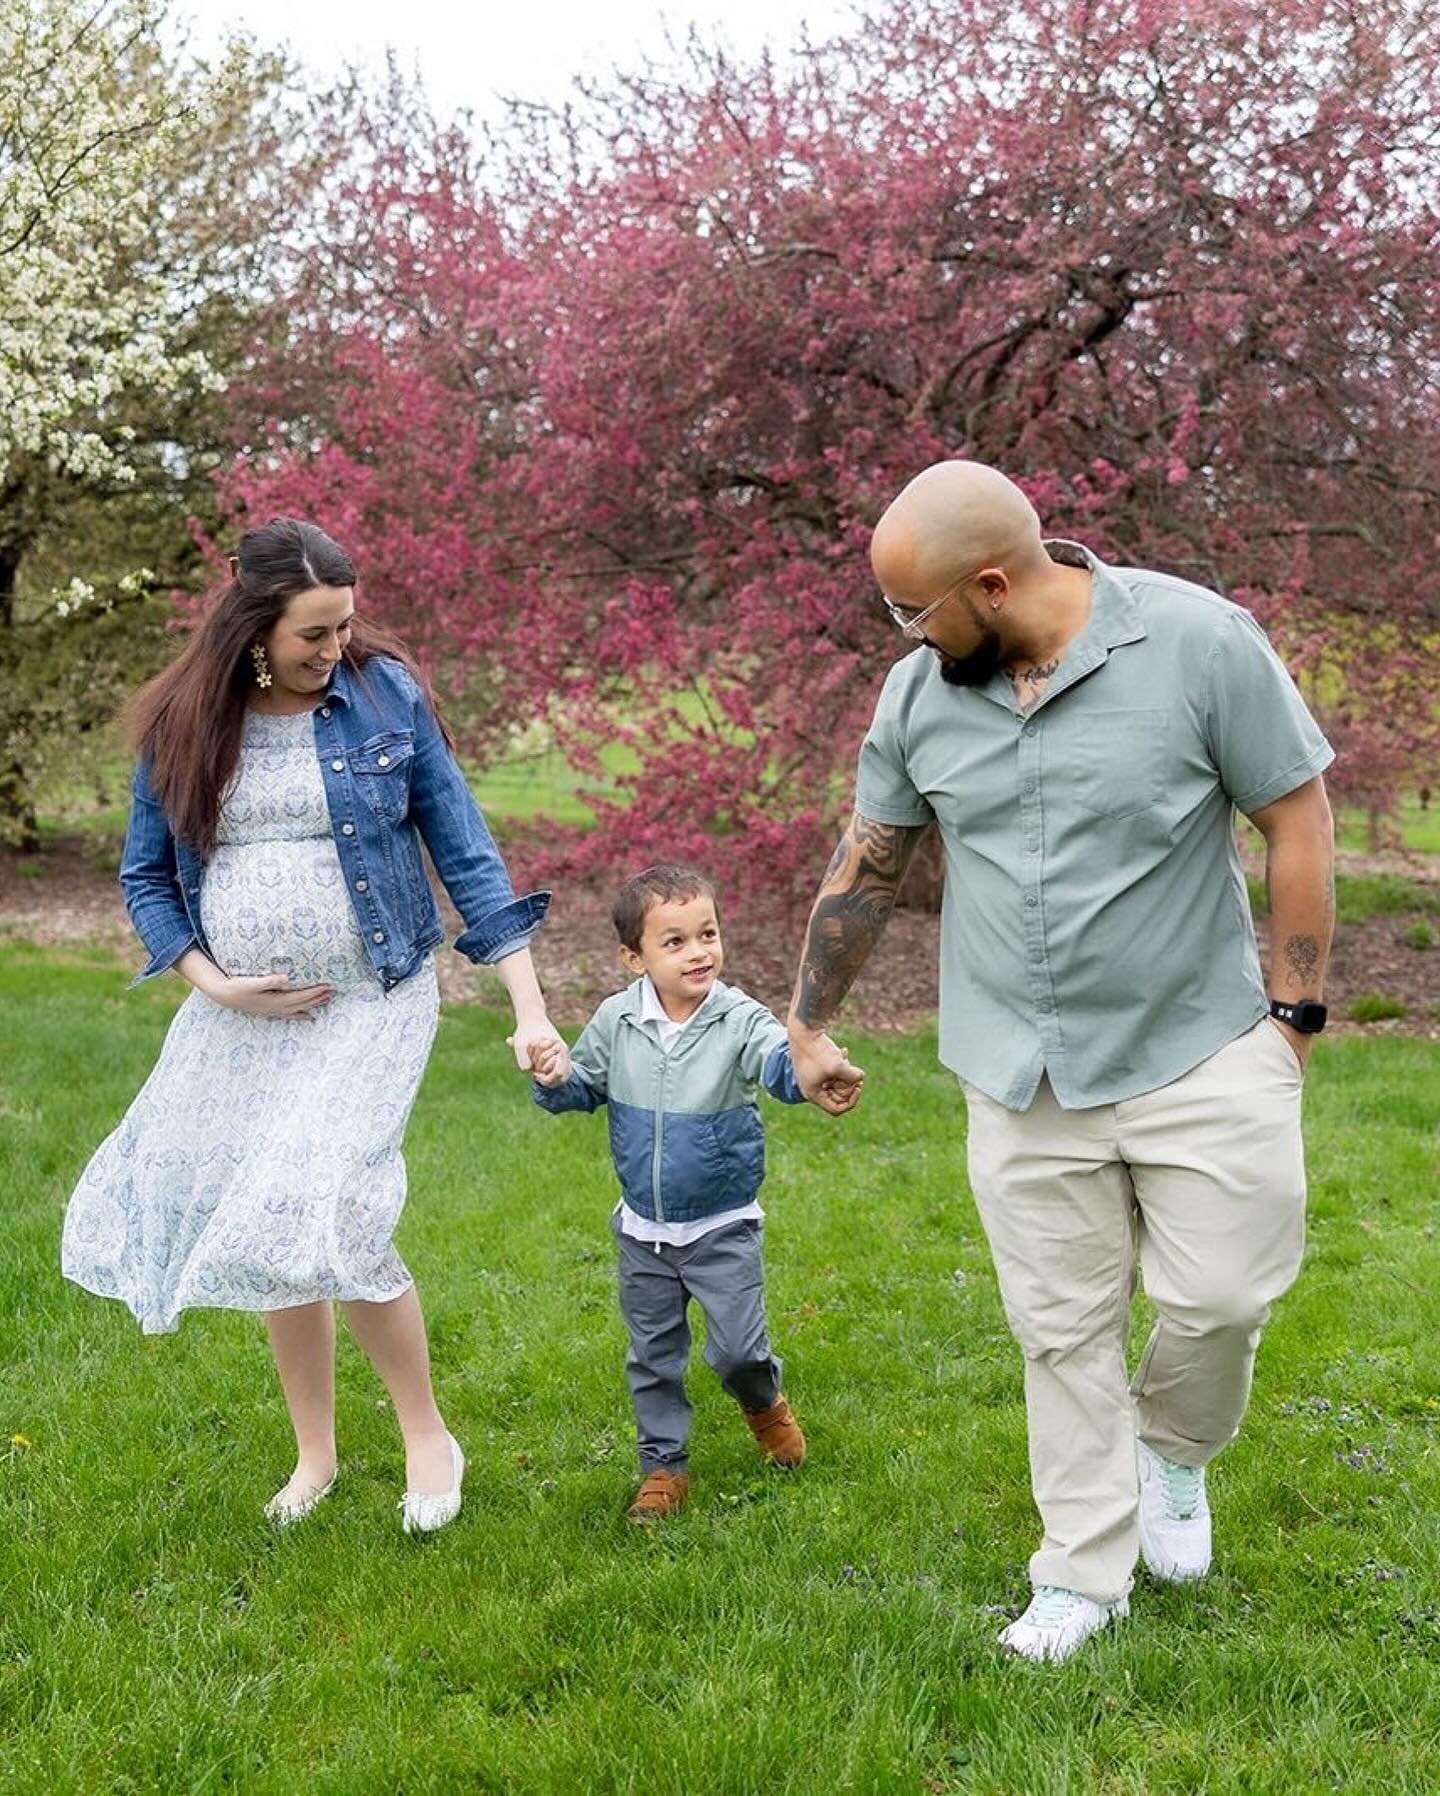 🌸 It was a chilly and drizzly spring day when we took these photos but I&rsquo;m SO glad we did! Just a few days later this family welcomed baby brother unexpectedly early. 👶🏼

Can&rsquo;t wait to meet him soon and see the Warren&lsquo;s as a fami